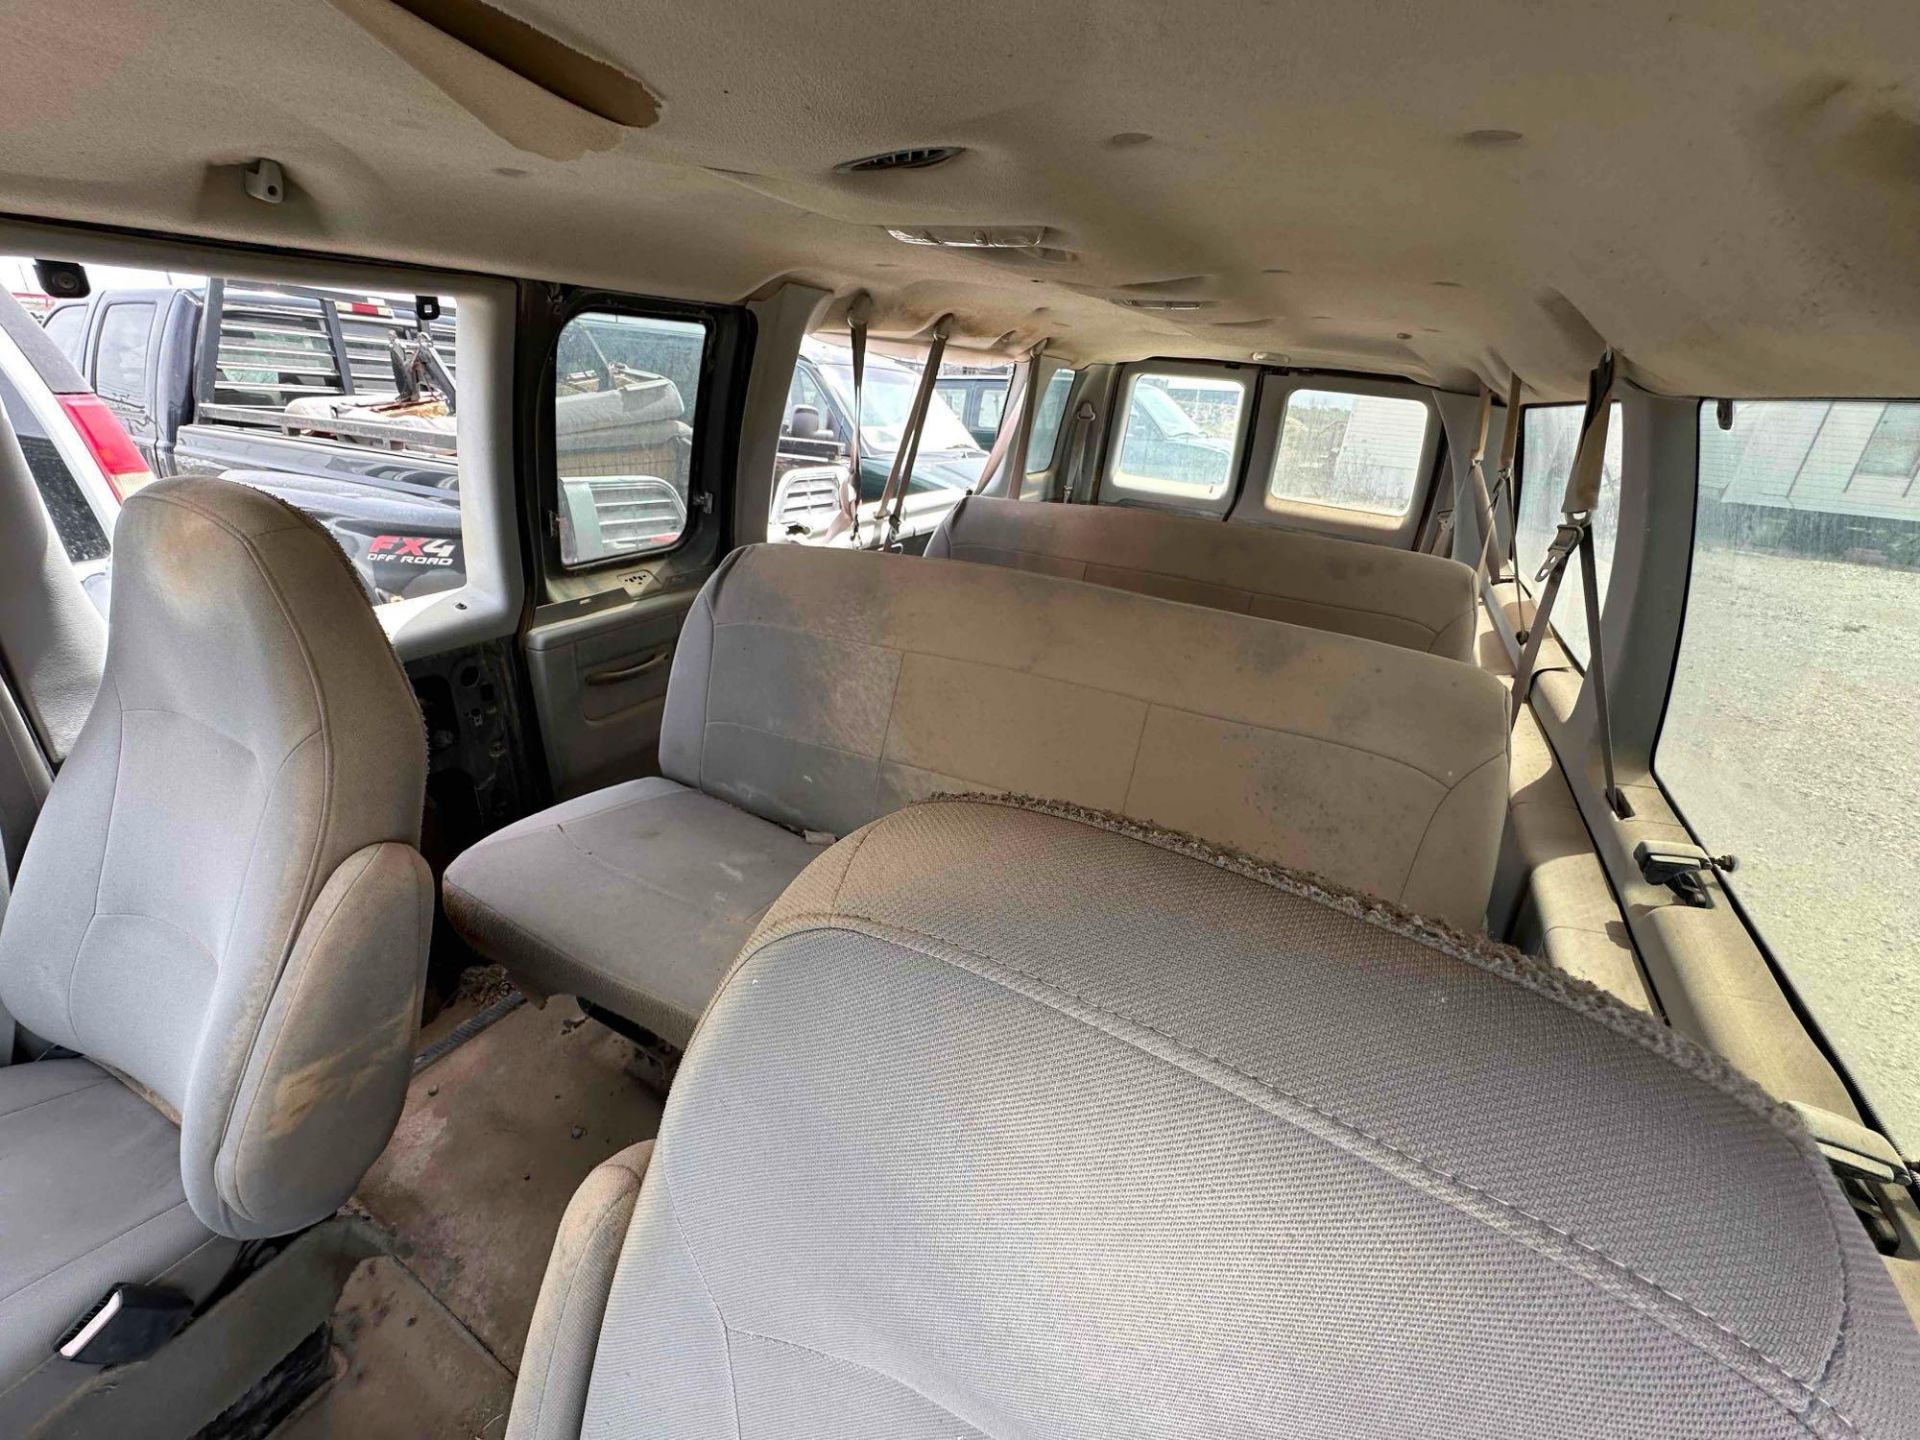 2007 Ford E350 Van - Image 14 of 14